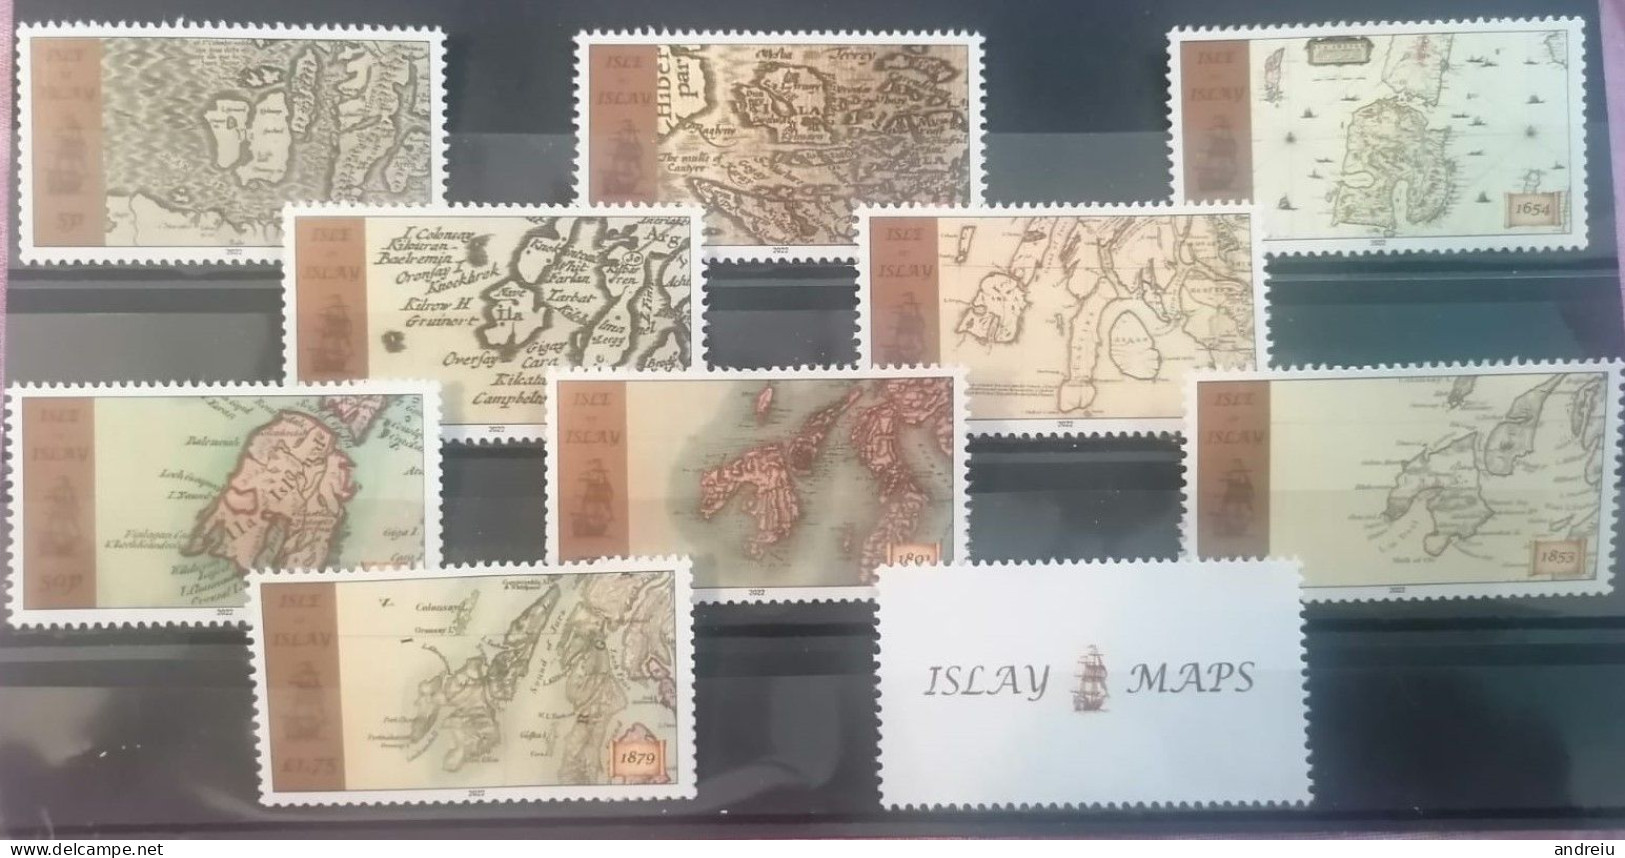 2022 GB Locals: Isle Of Islay - Old Maps Of Islay 9v+label, Geography, Cartes, Karten, Mapas MNH - Islands